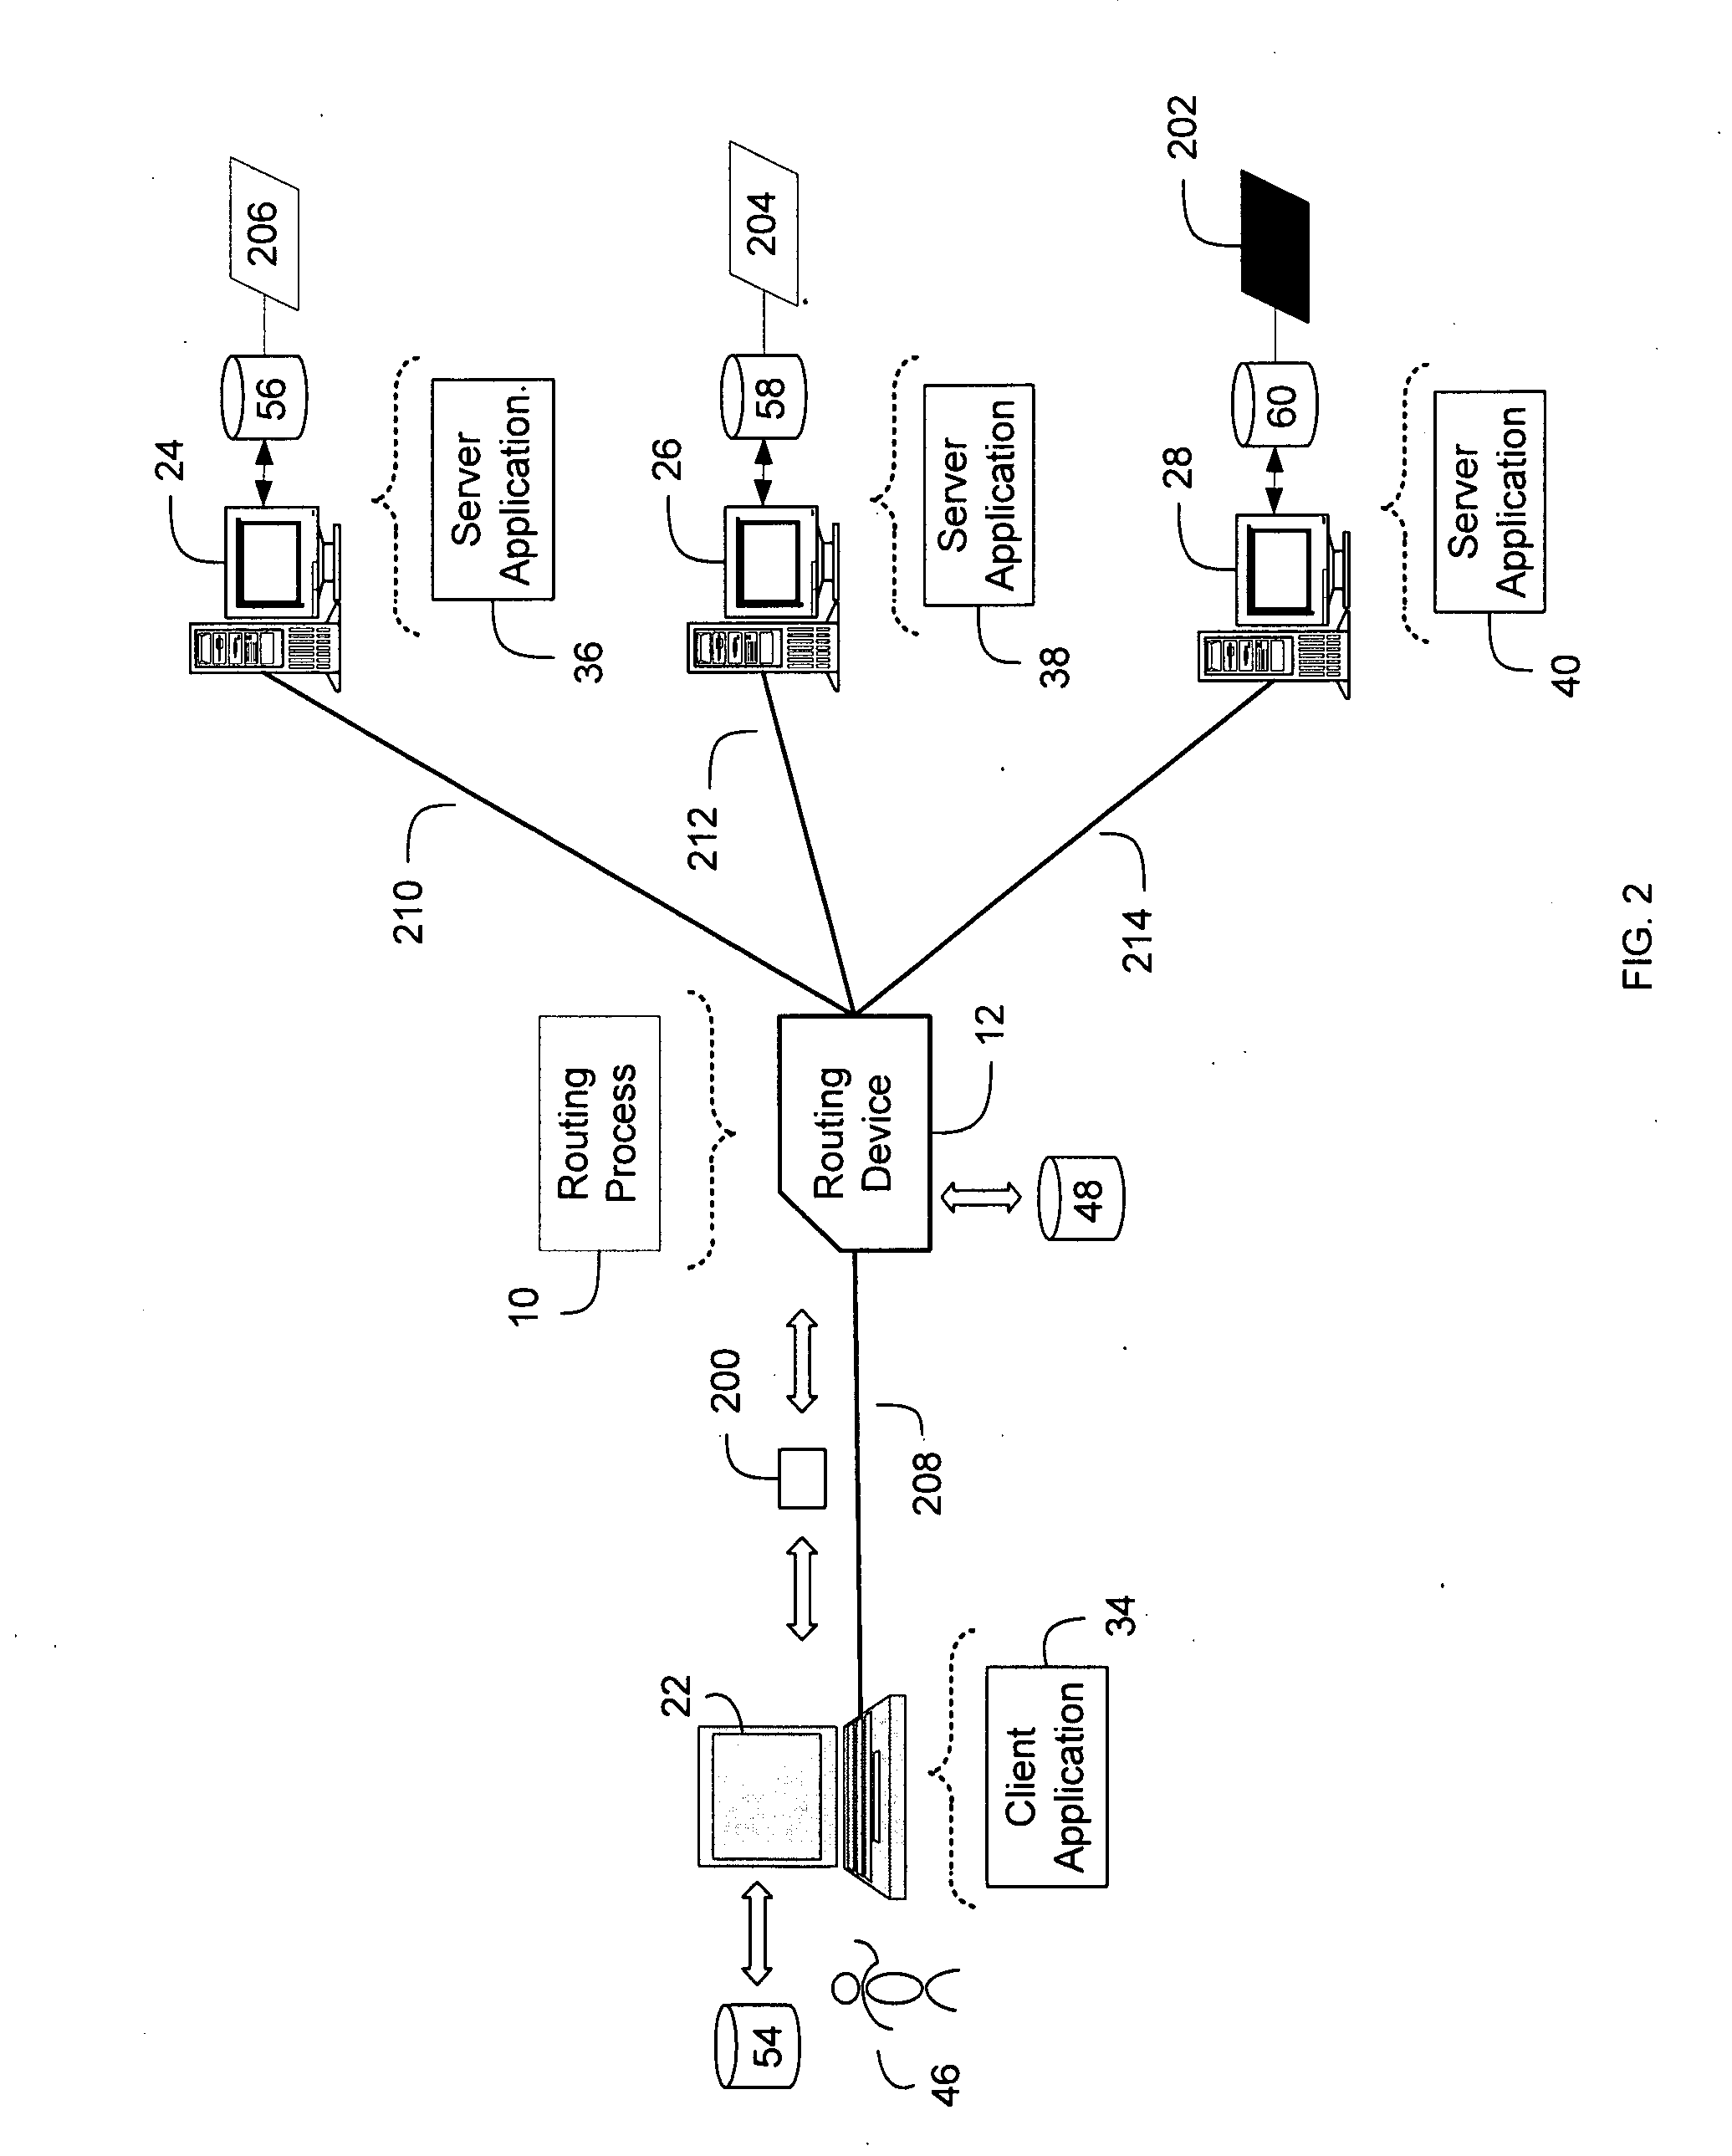 Method and system for content-based routing of network traffic